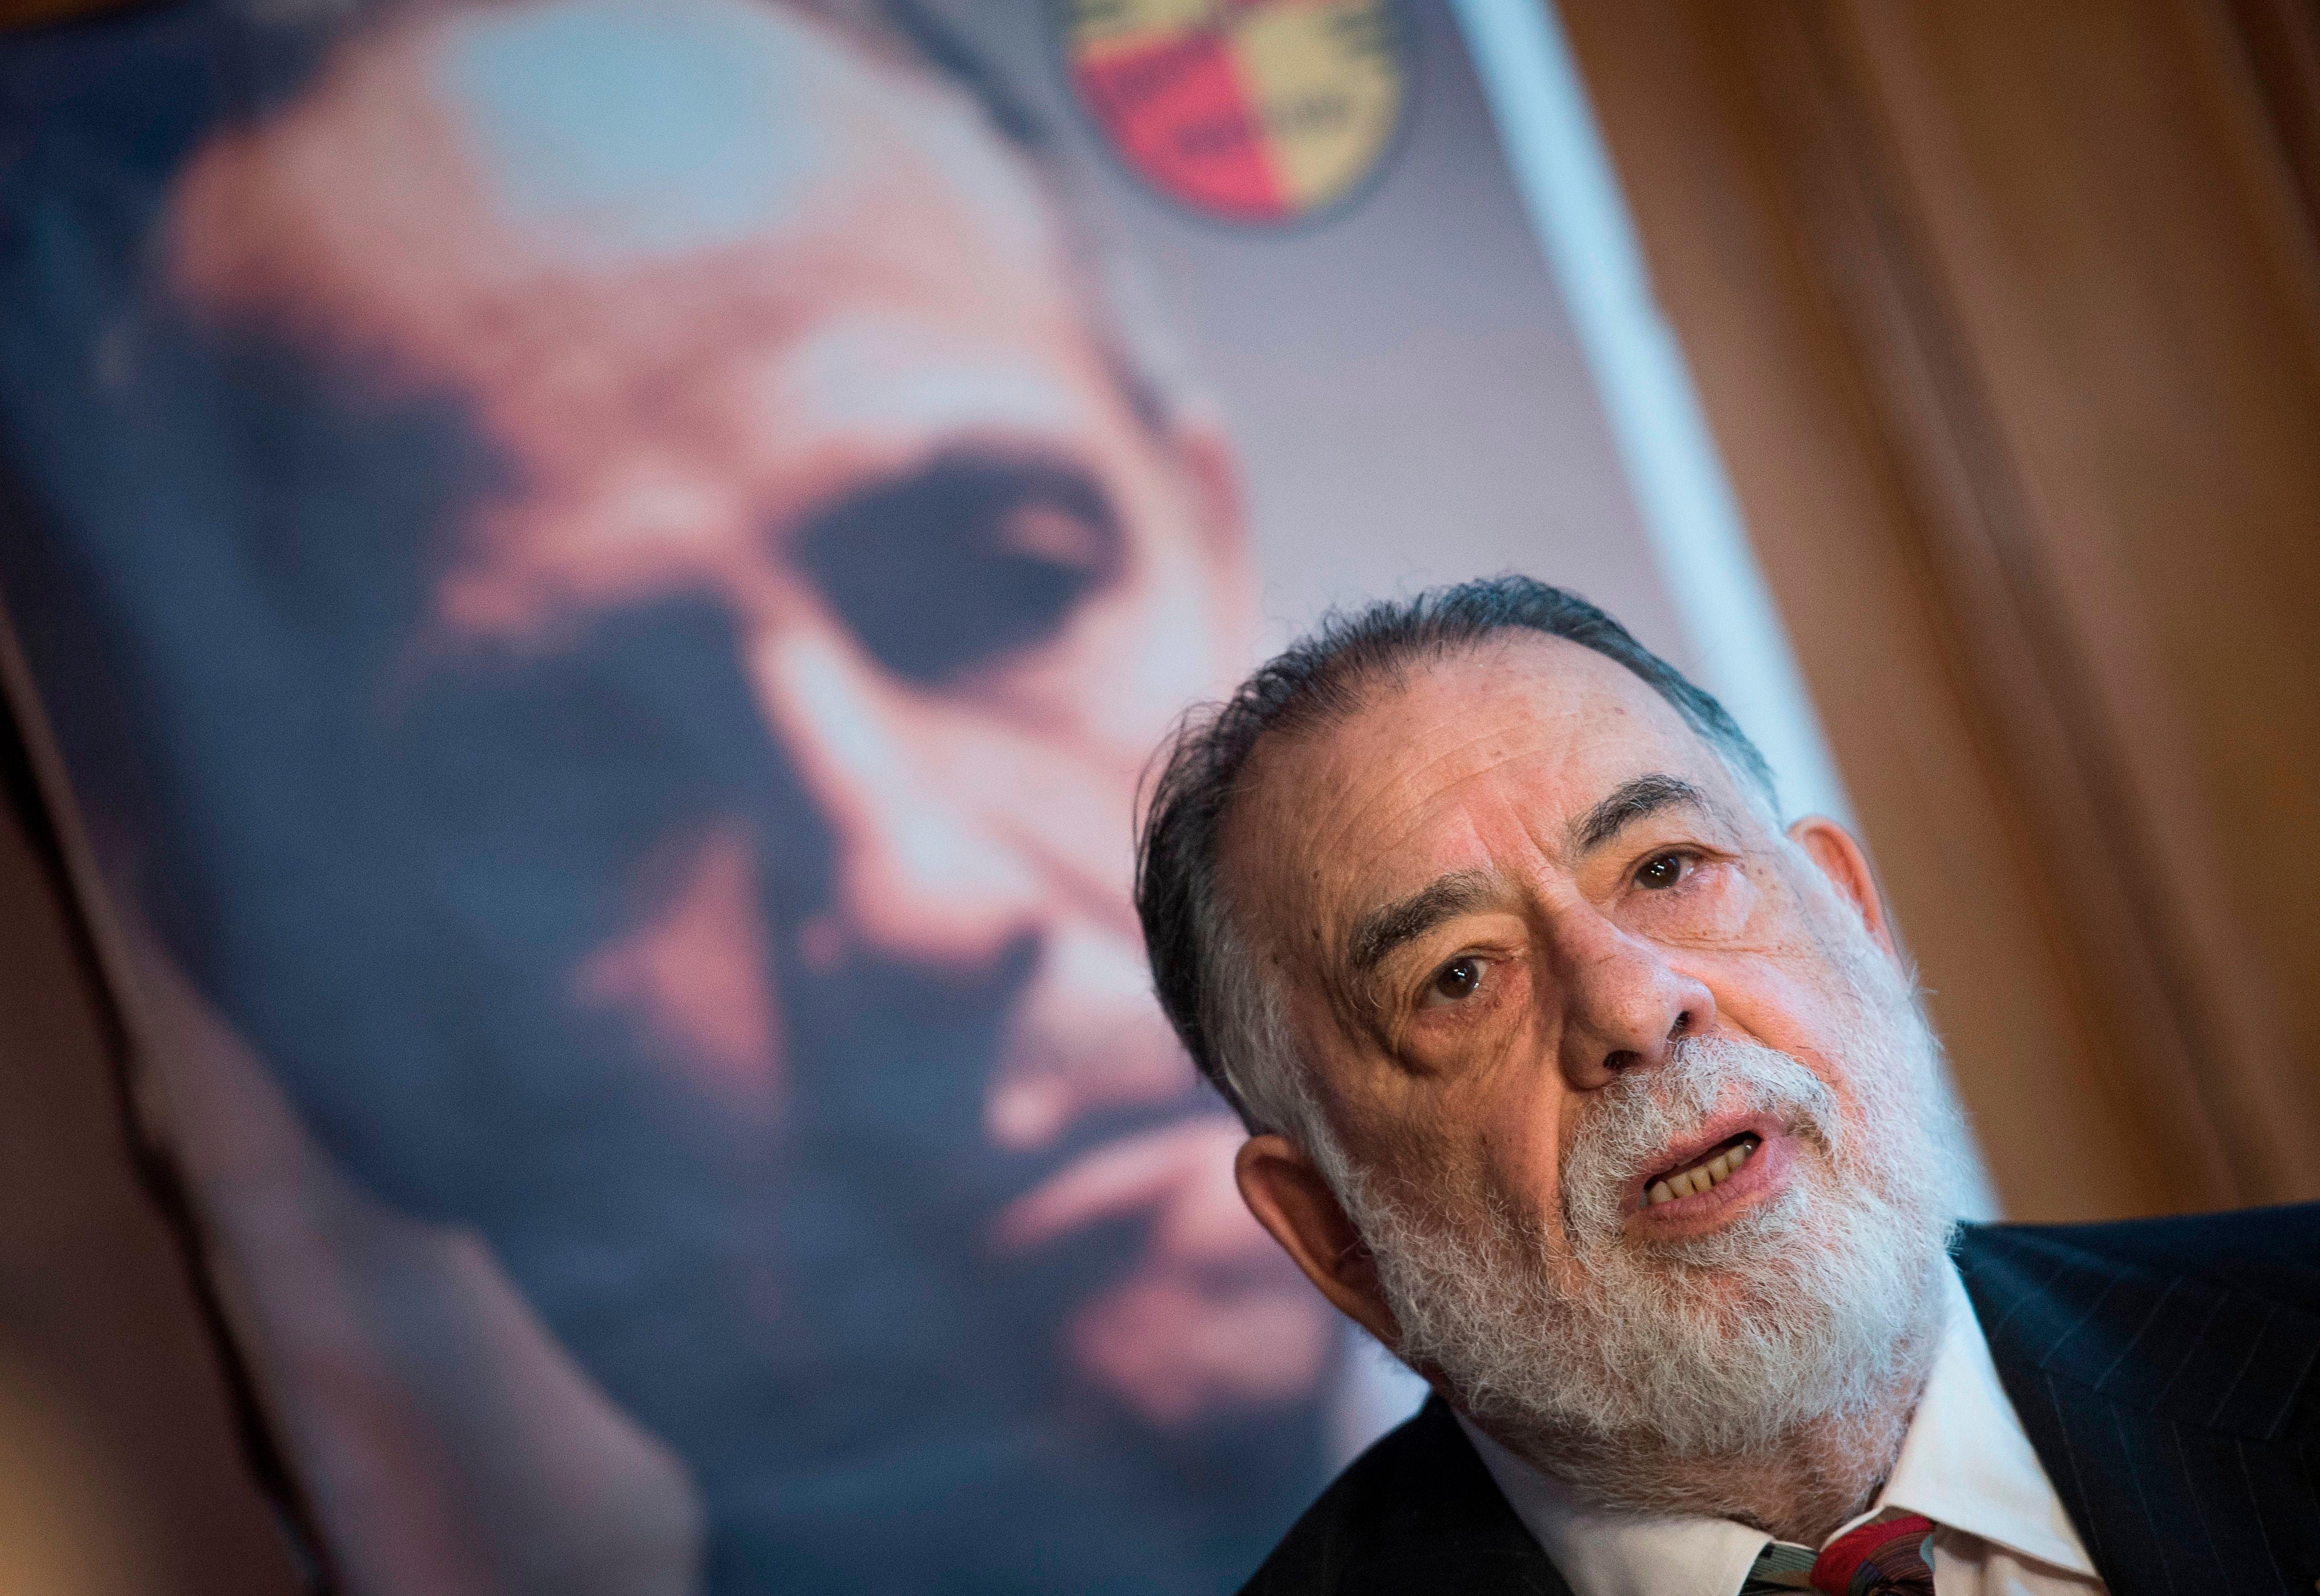 Francis Ford Coppola at the Stockholm Film Festival in 2016